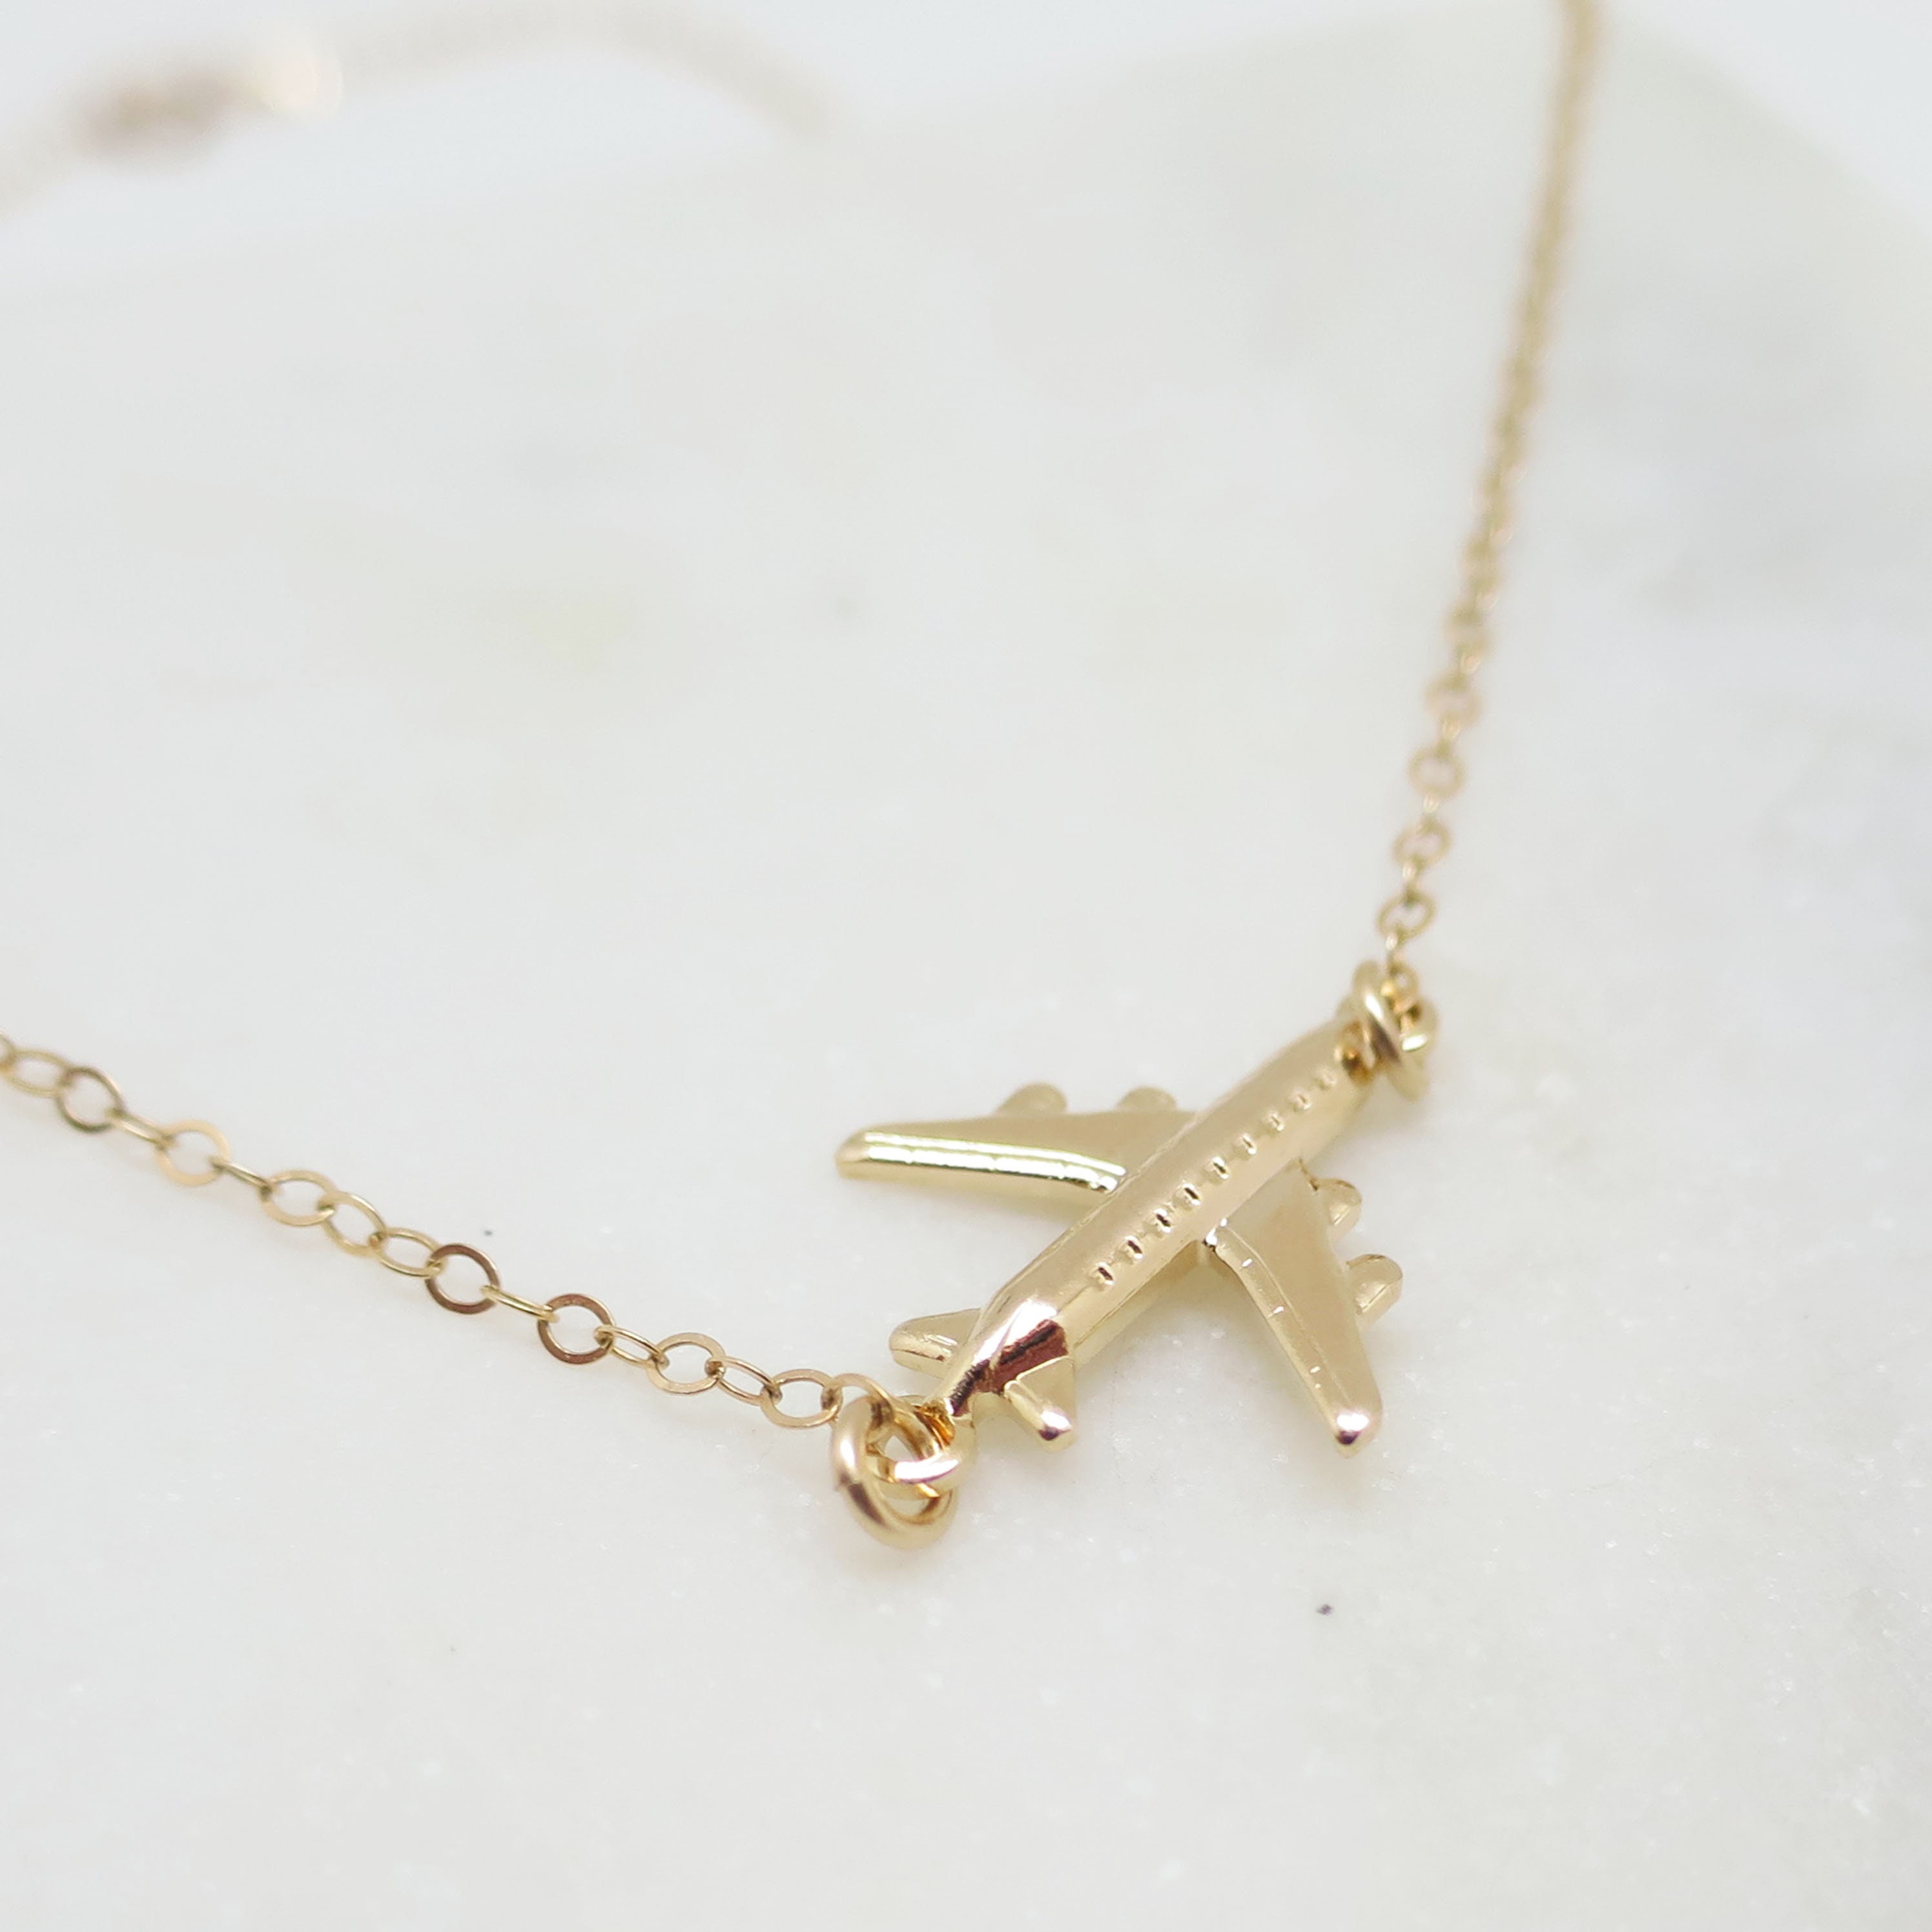 Travel Inspired Golden or Silver Airplane Wanderlust Necklace